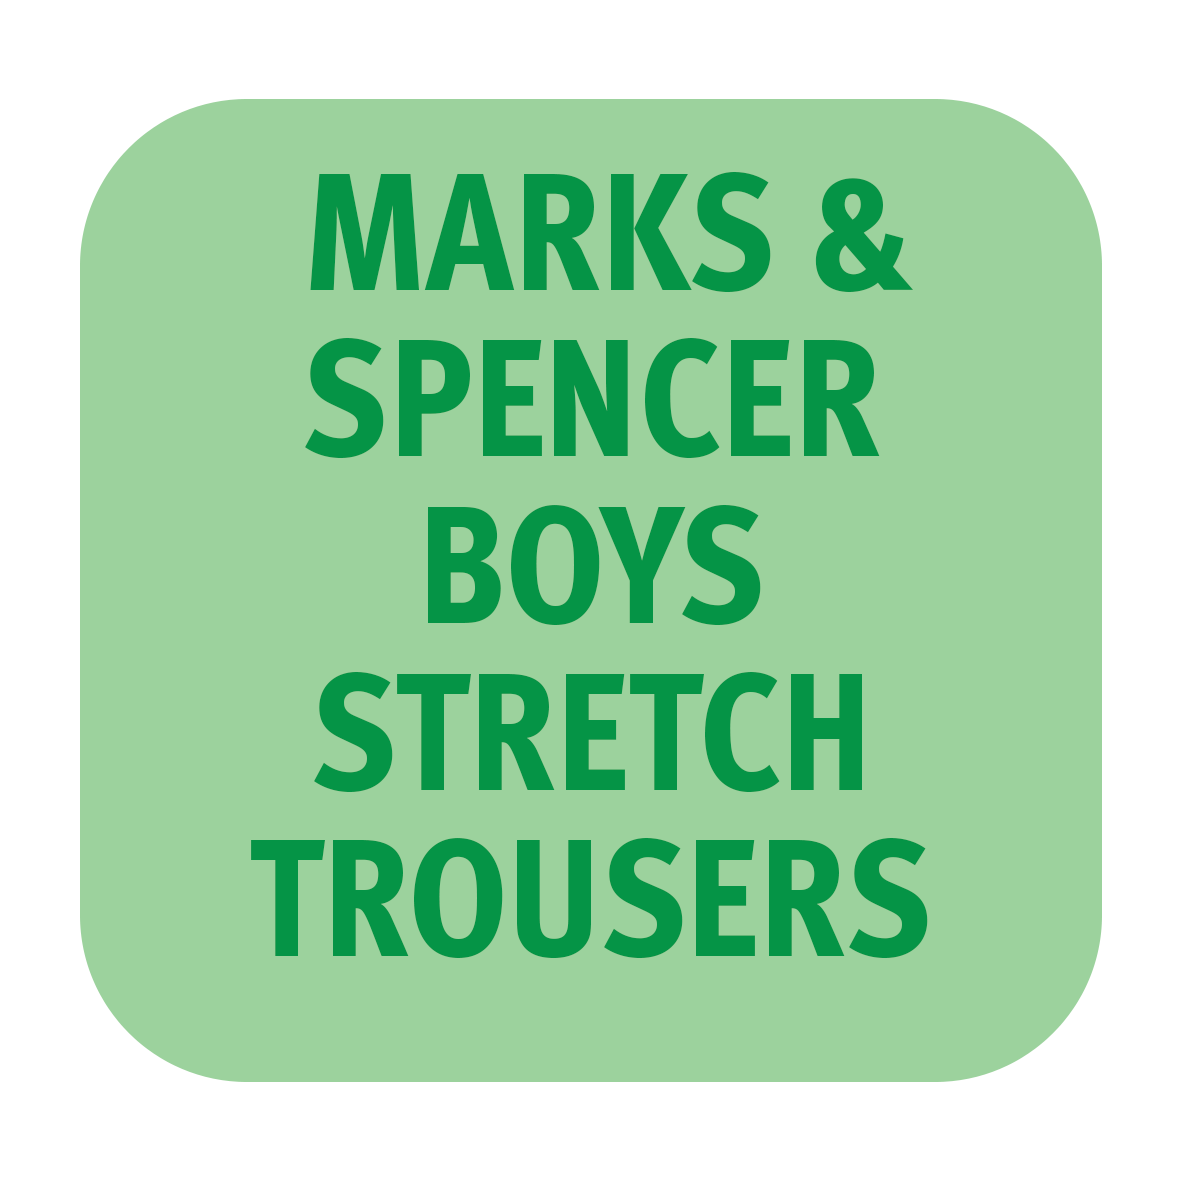 M&S TROUSER BOYS STRETCH.png